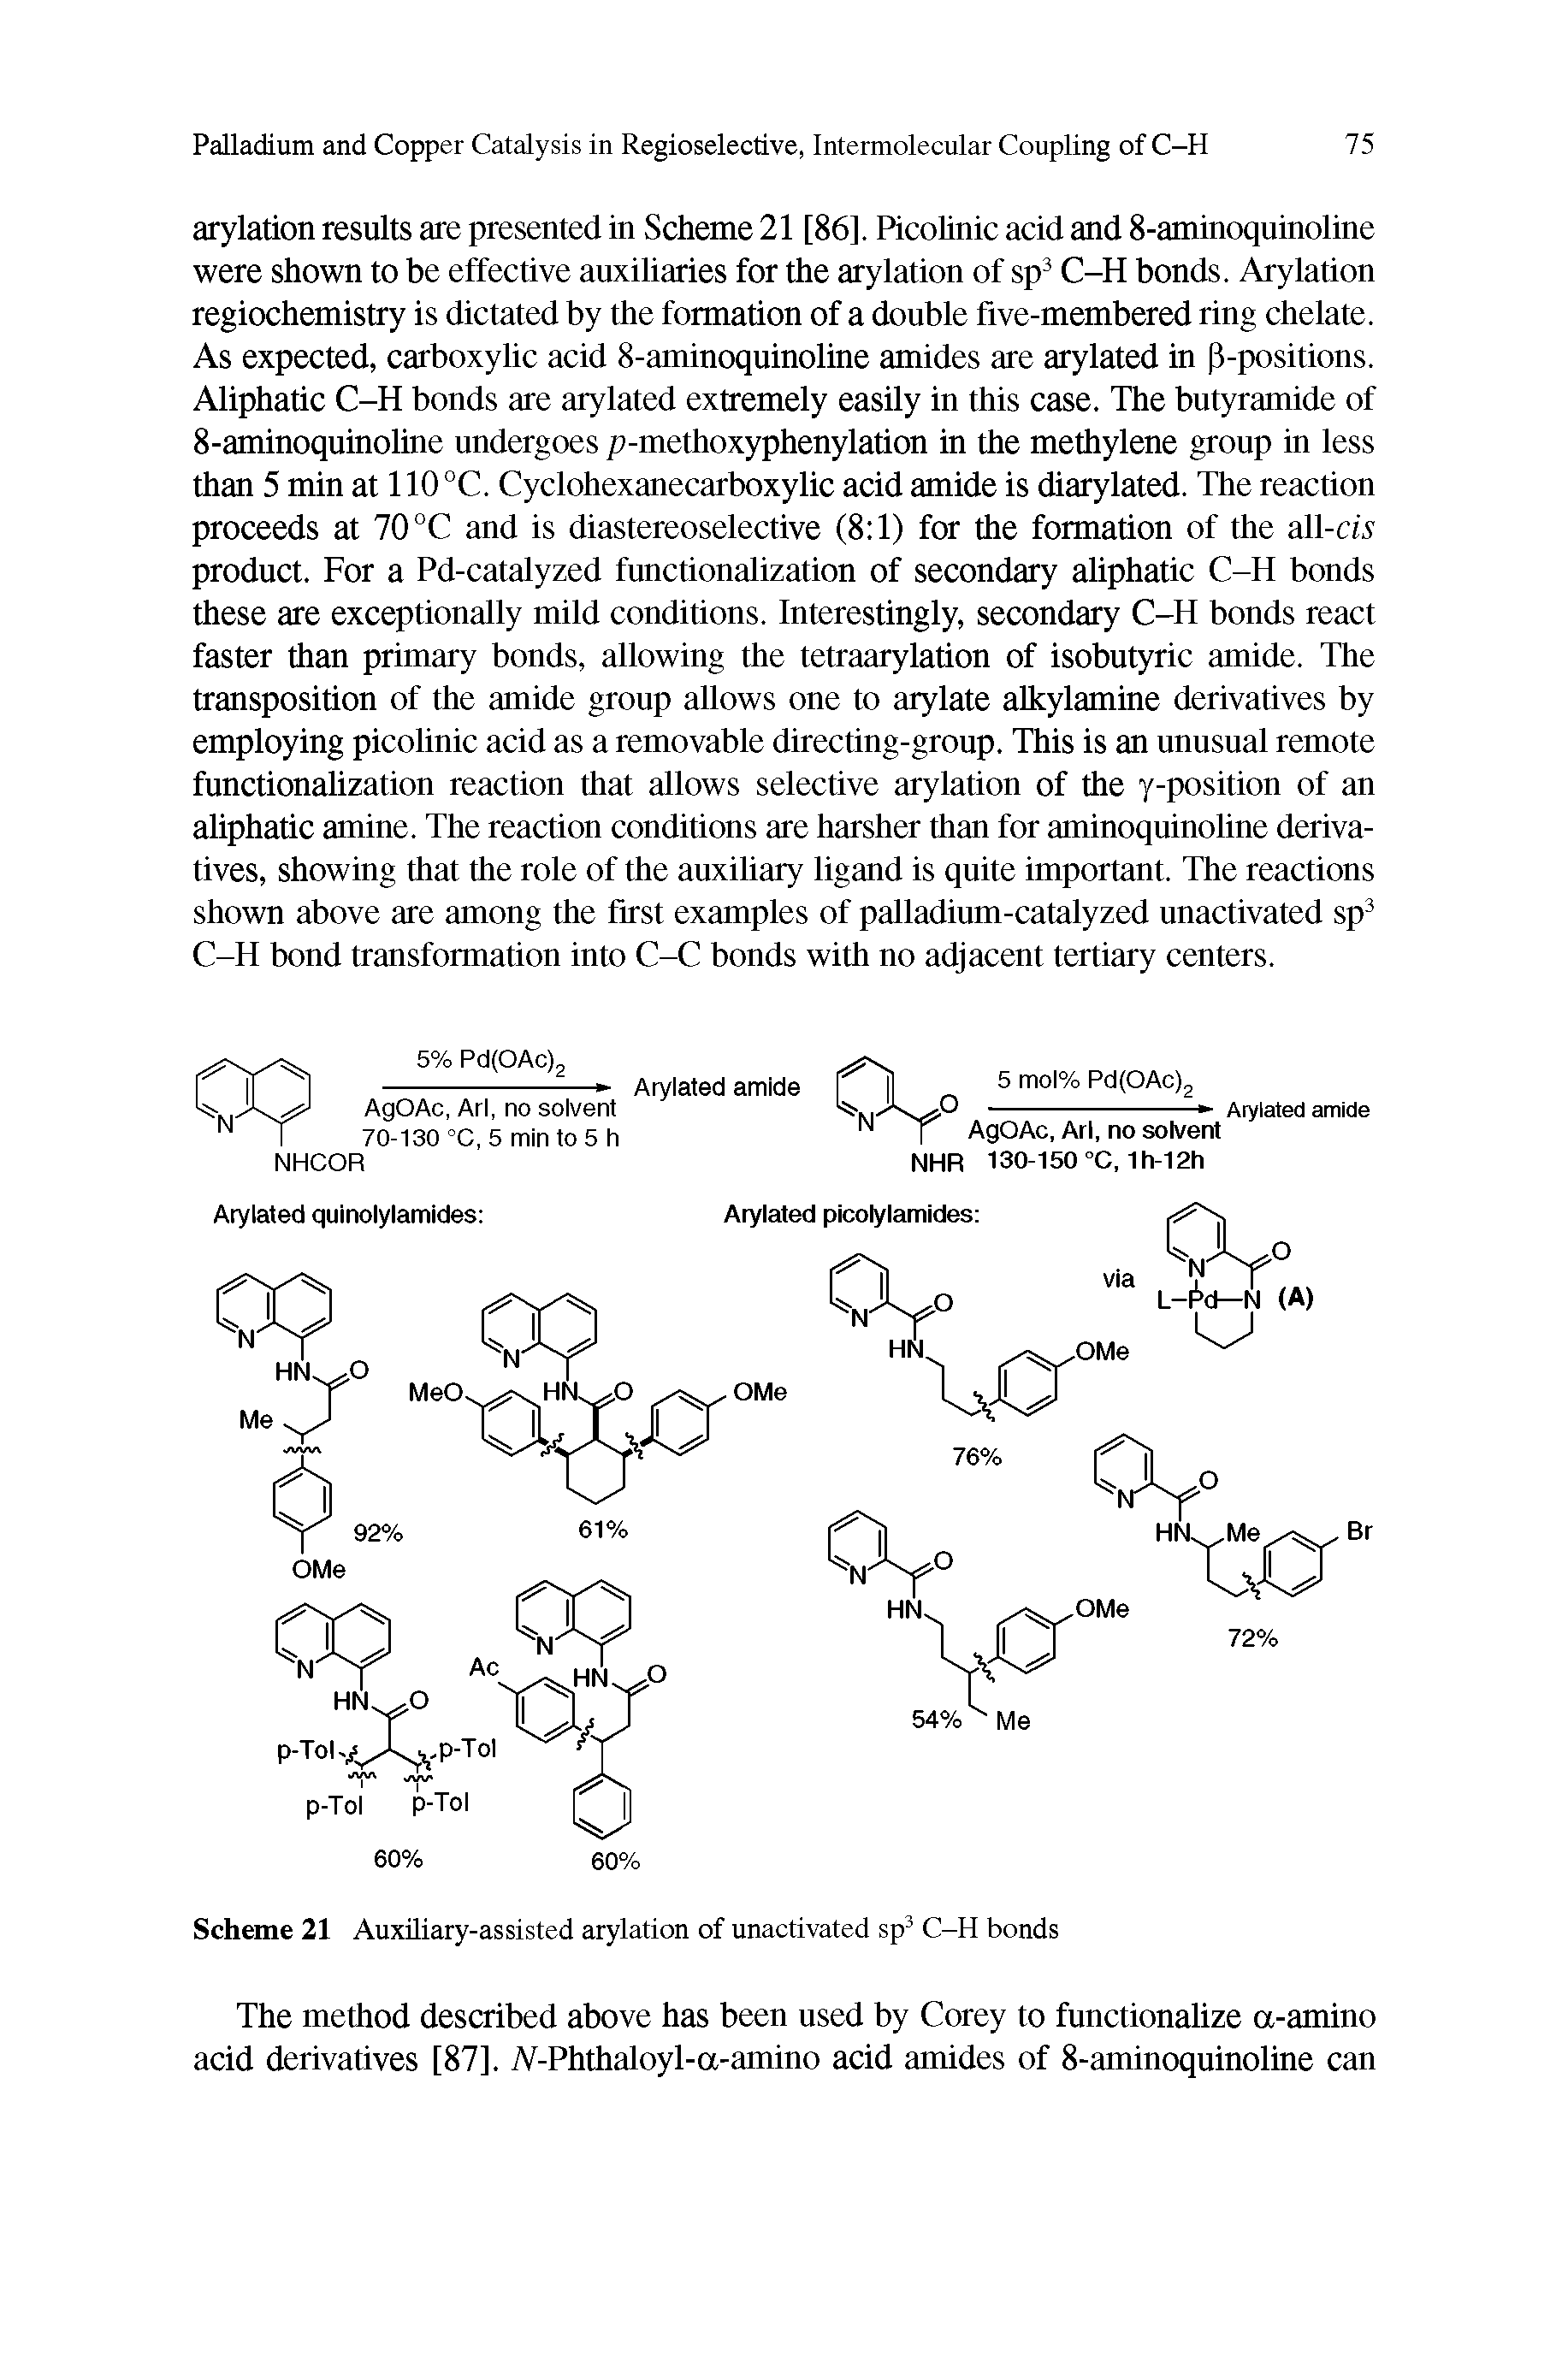 Scheme 21 Auxiliary-assisted arylation of unactivated sp3 C-H bonds...